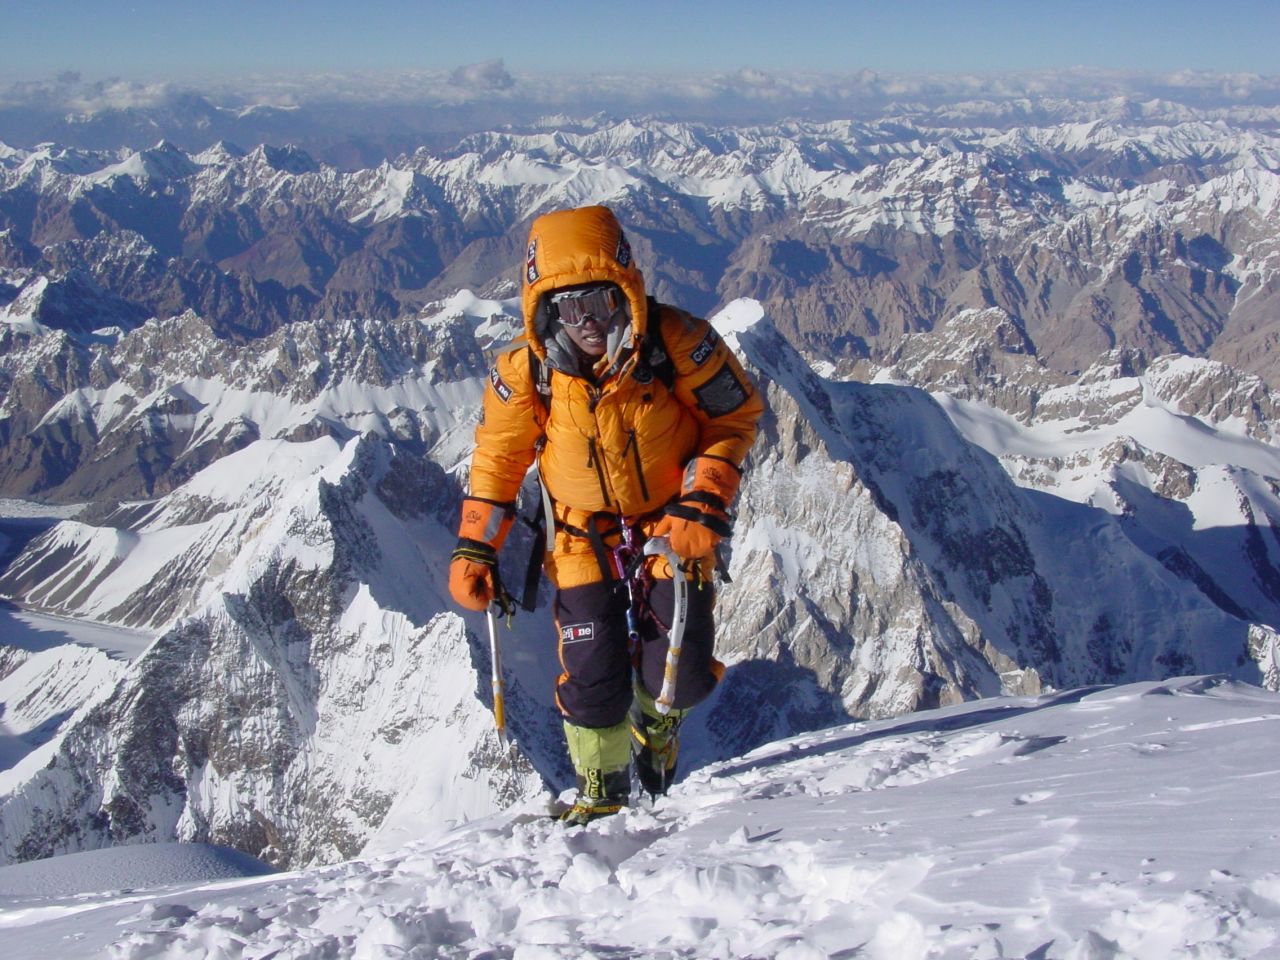 In 2011, Pasaban attempted to climb Everest for a second time. She decided to skip the artificial oxygen, but could not reach the summit. <br /><br />"This is an outstanding challenge," she says. "I will not like to finish my career without having achieved it, but I have to find the right moment in my professional life to do it. It is a dream."<br /><br />Pasaban pictured at the summit of K2, the world's second highest mountain, in 2004. This, like all mountains except Everest, she climbed without artificial oxygen.